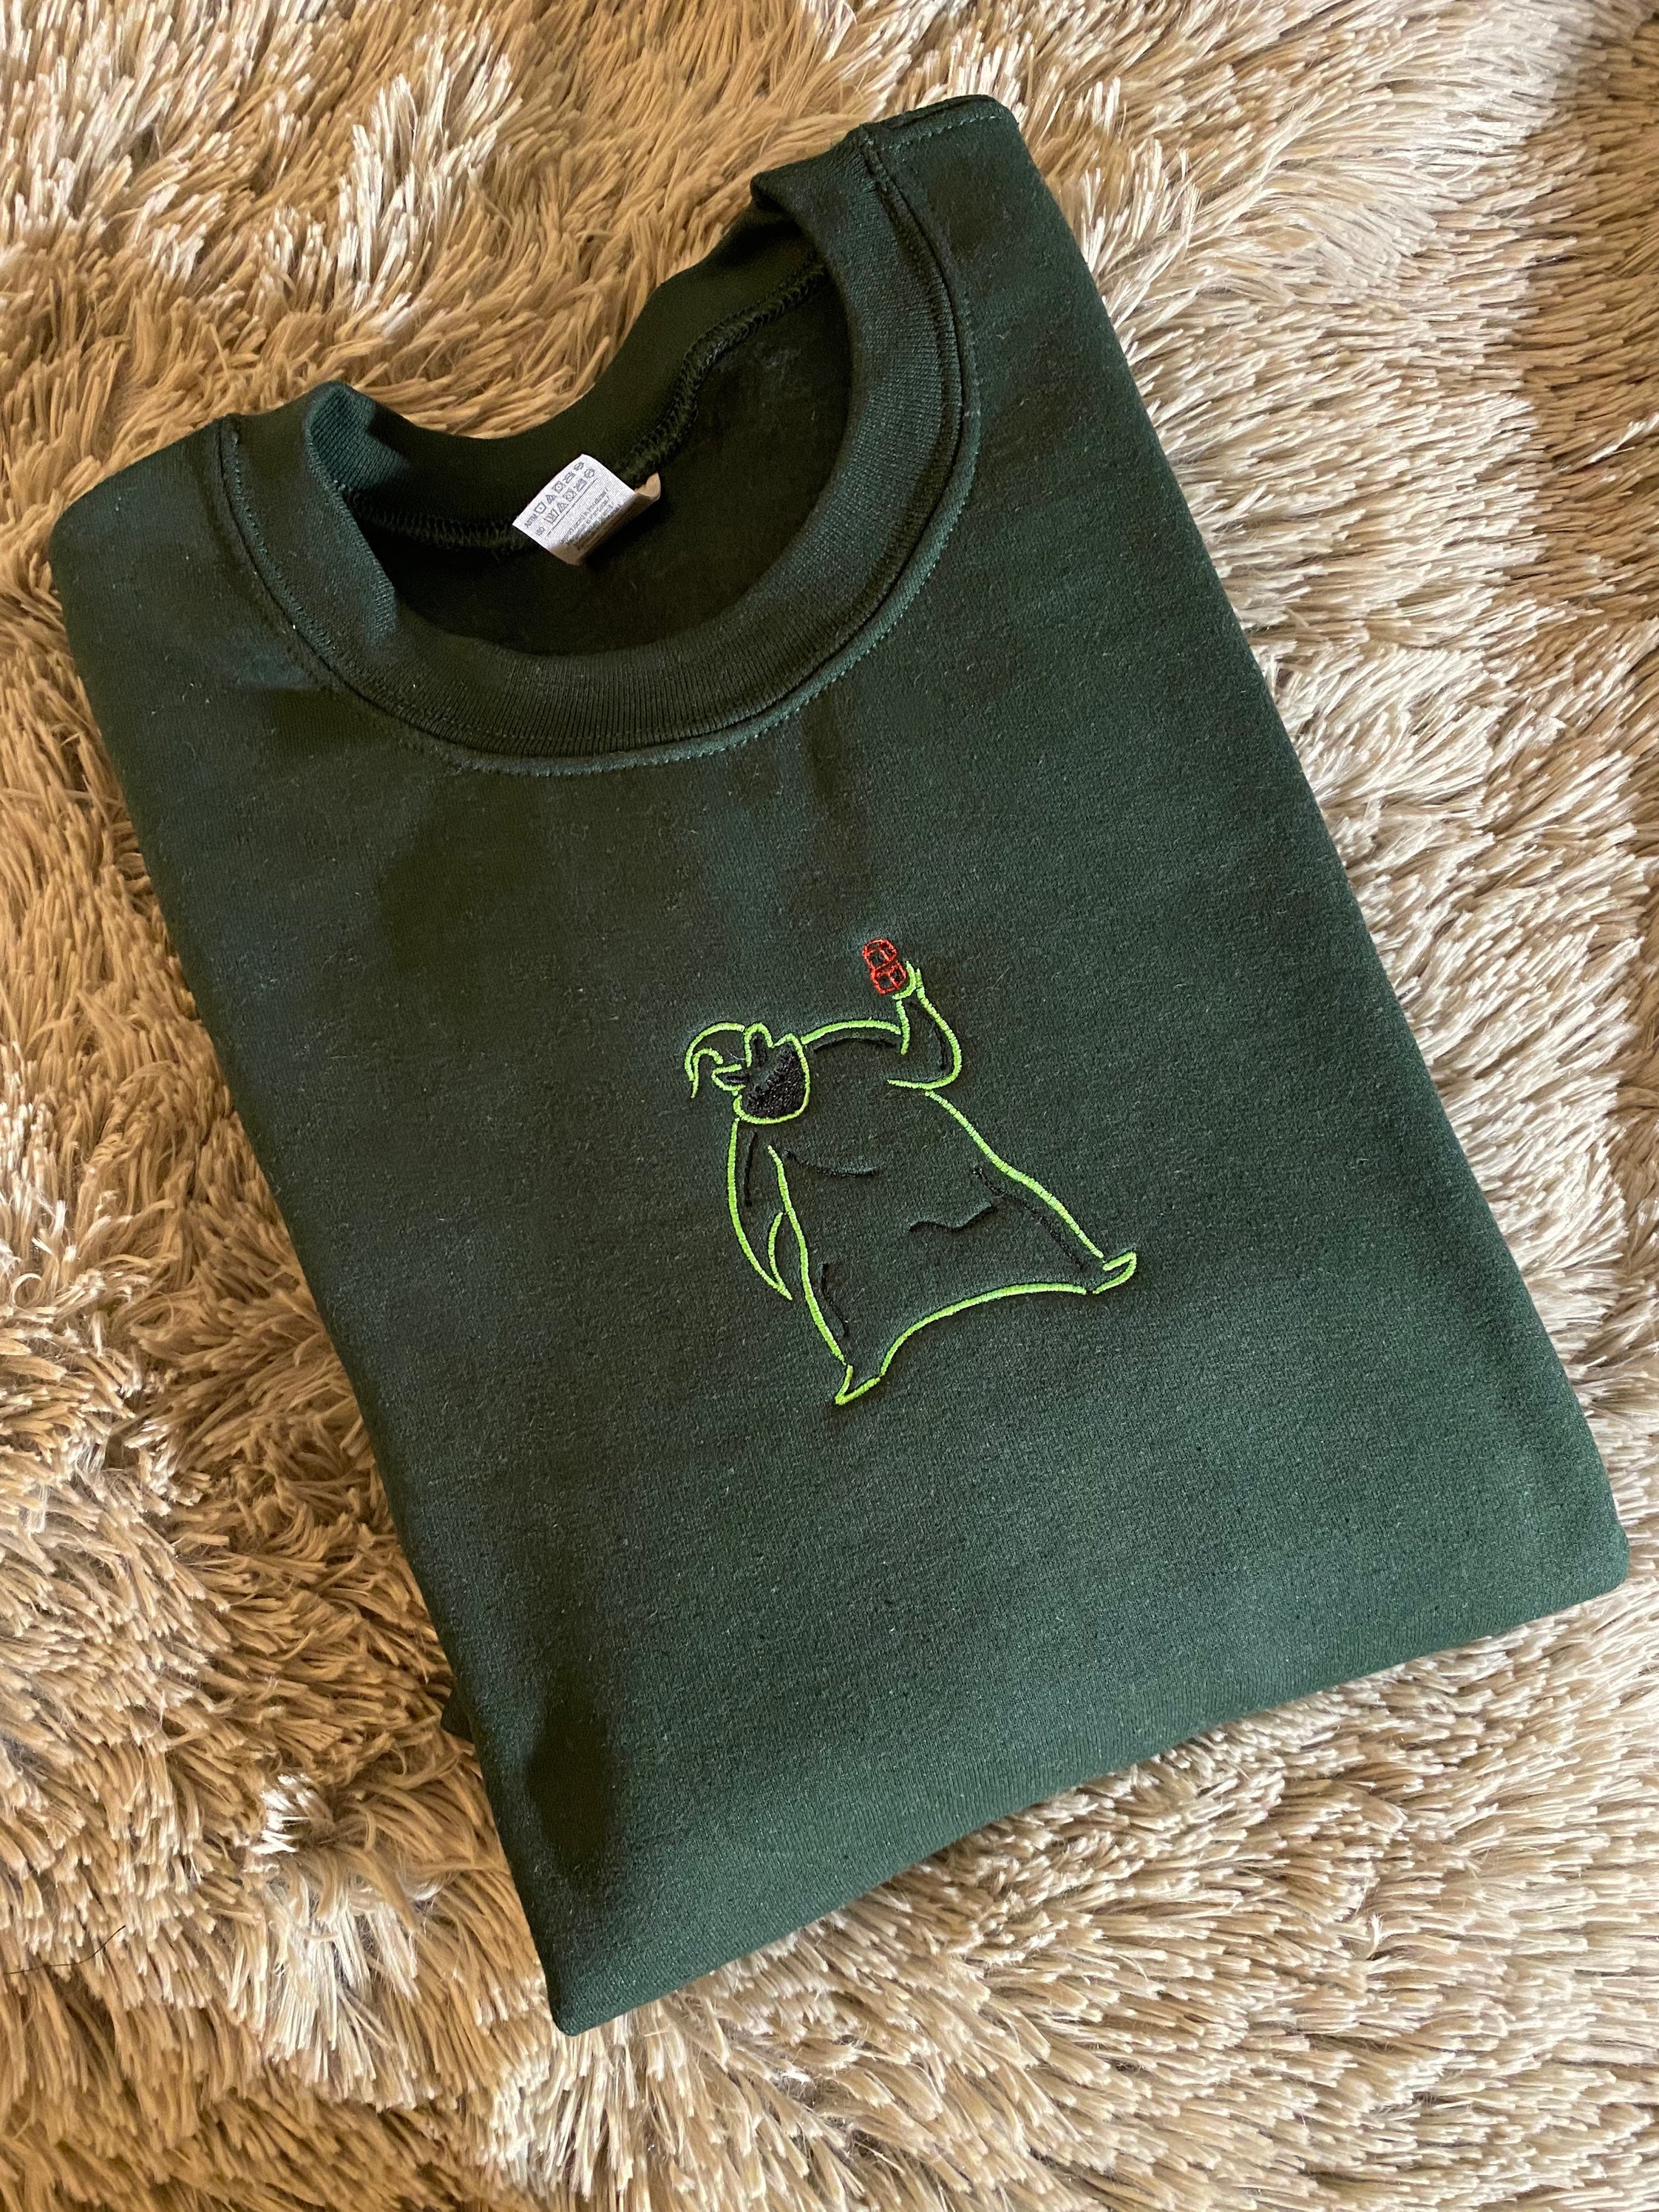 Oogie boogie embroidered sweatshirt, embroidered